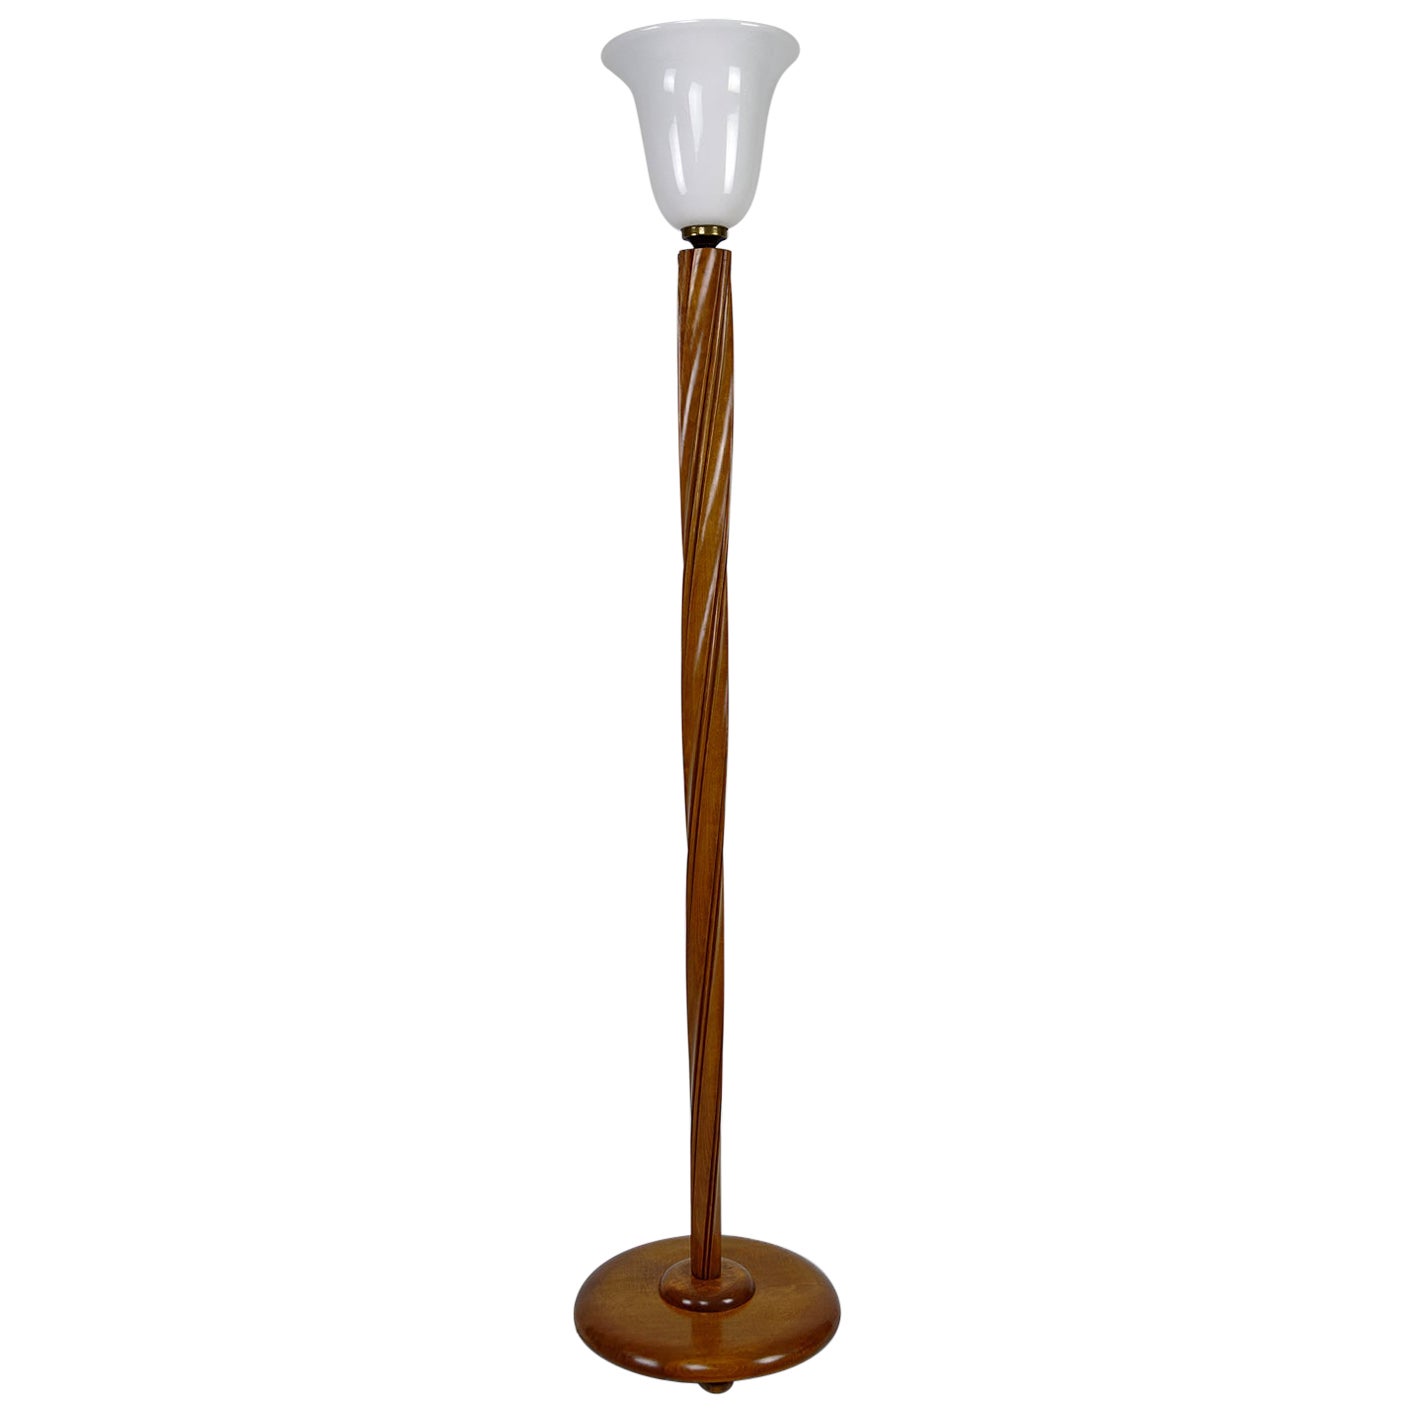 Art Deco Helical Floor Lamp with Opaline, France, circa 1930